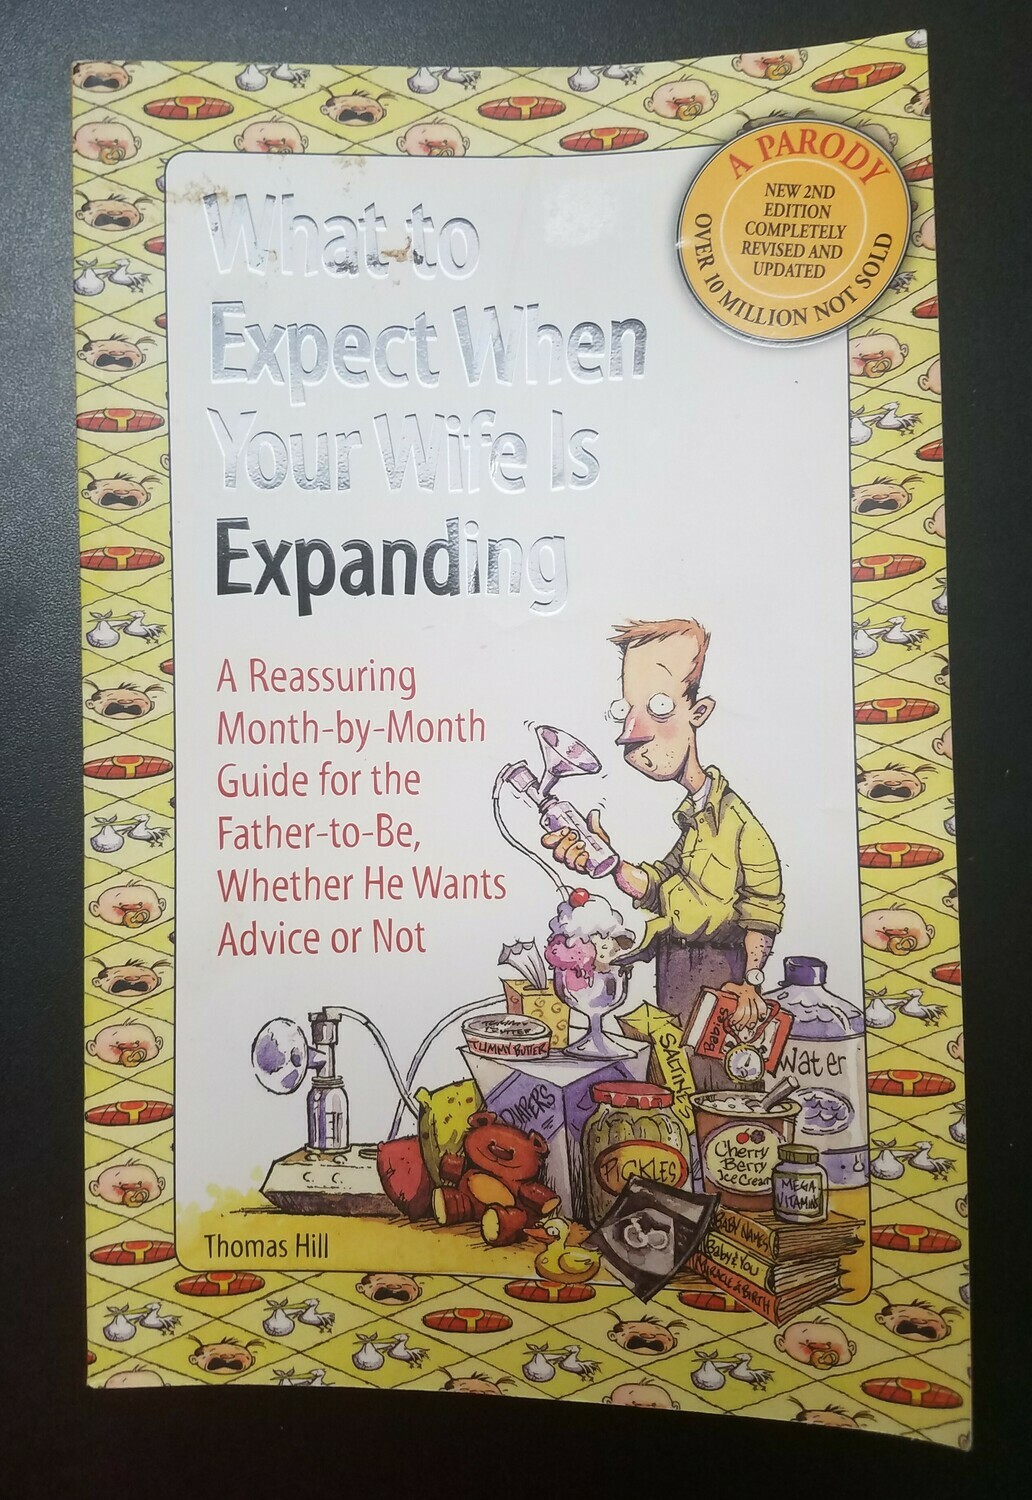 What to Expect When Your Wife is Expanding by Thomas Hill